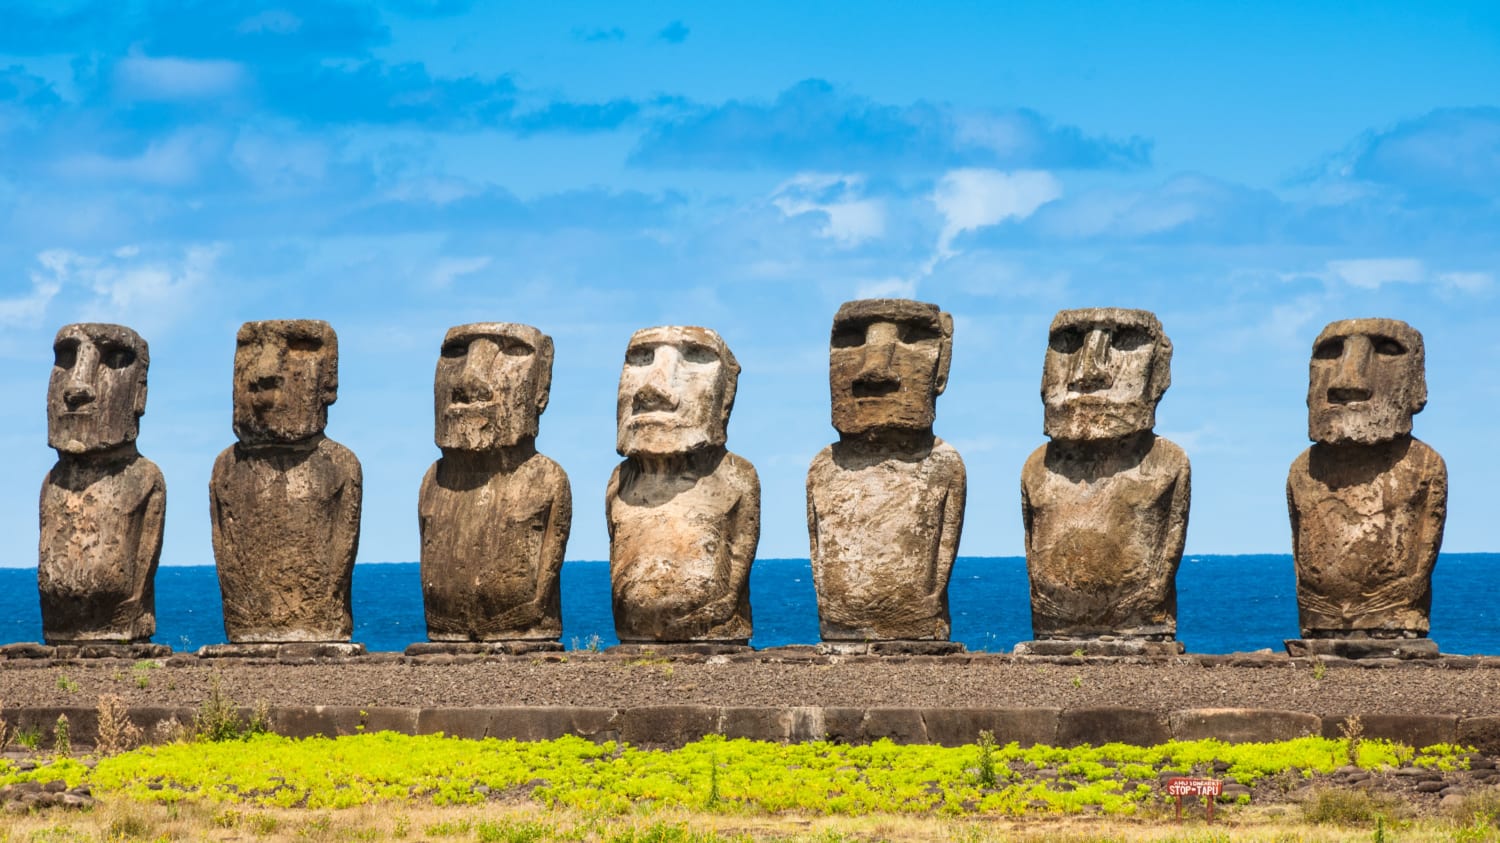 New Study Reveals Why Easter Island's Statues Are Positioned Along the Coast